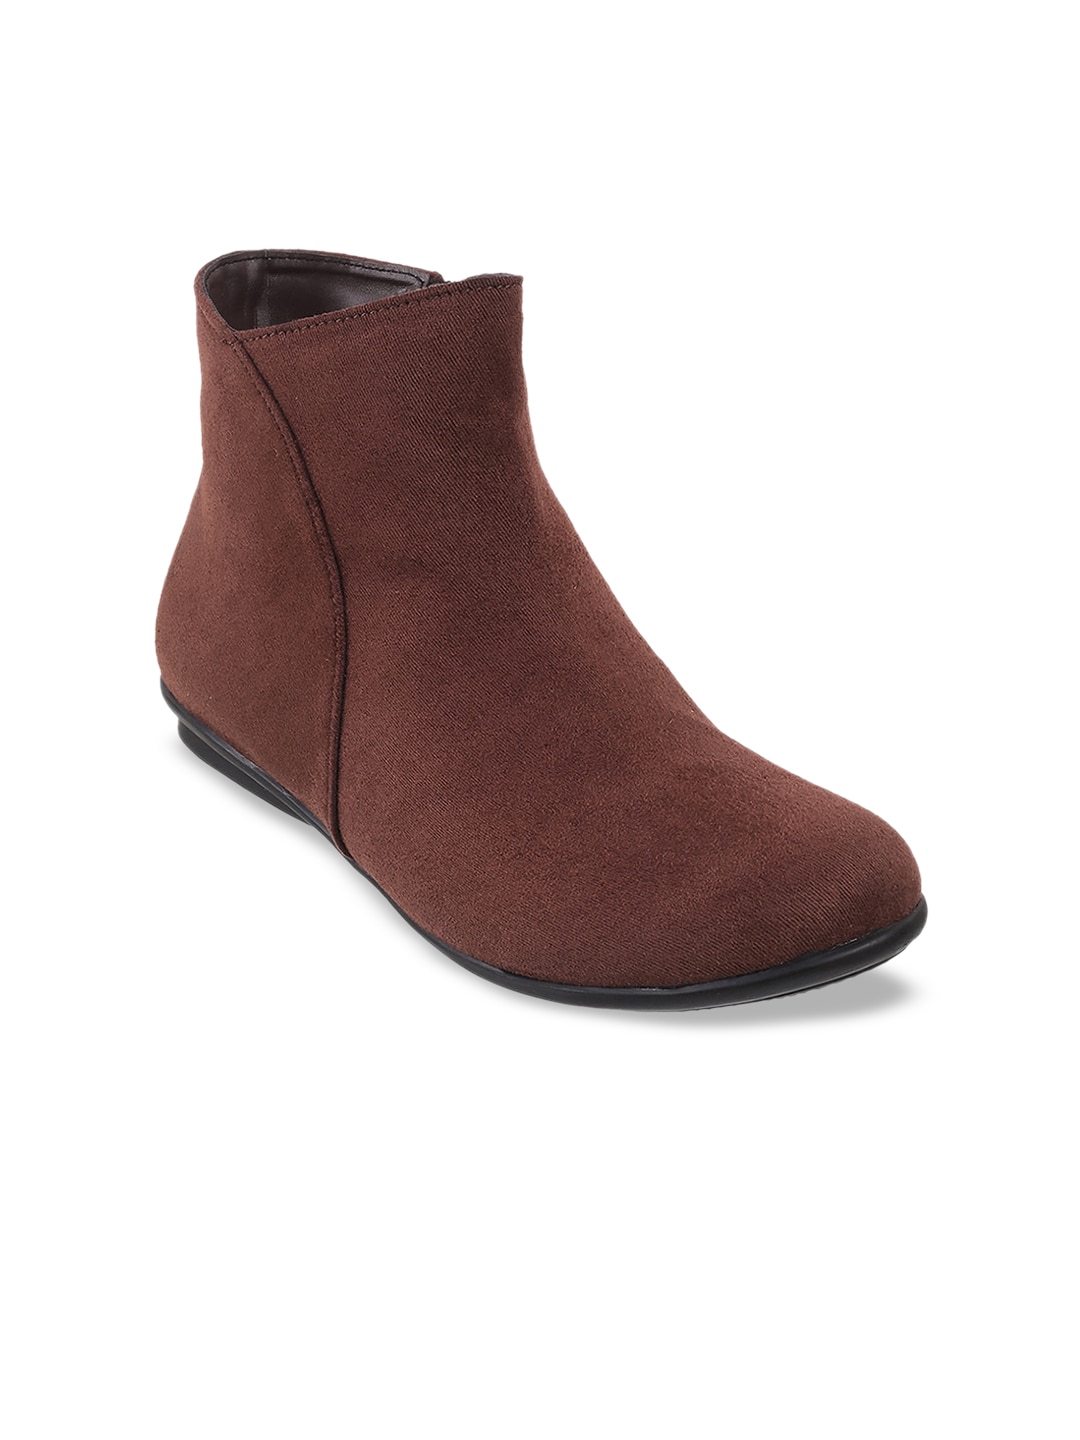 Mochi Women Brown Suede Flat Boots Price in India